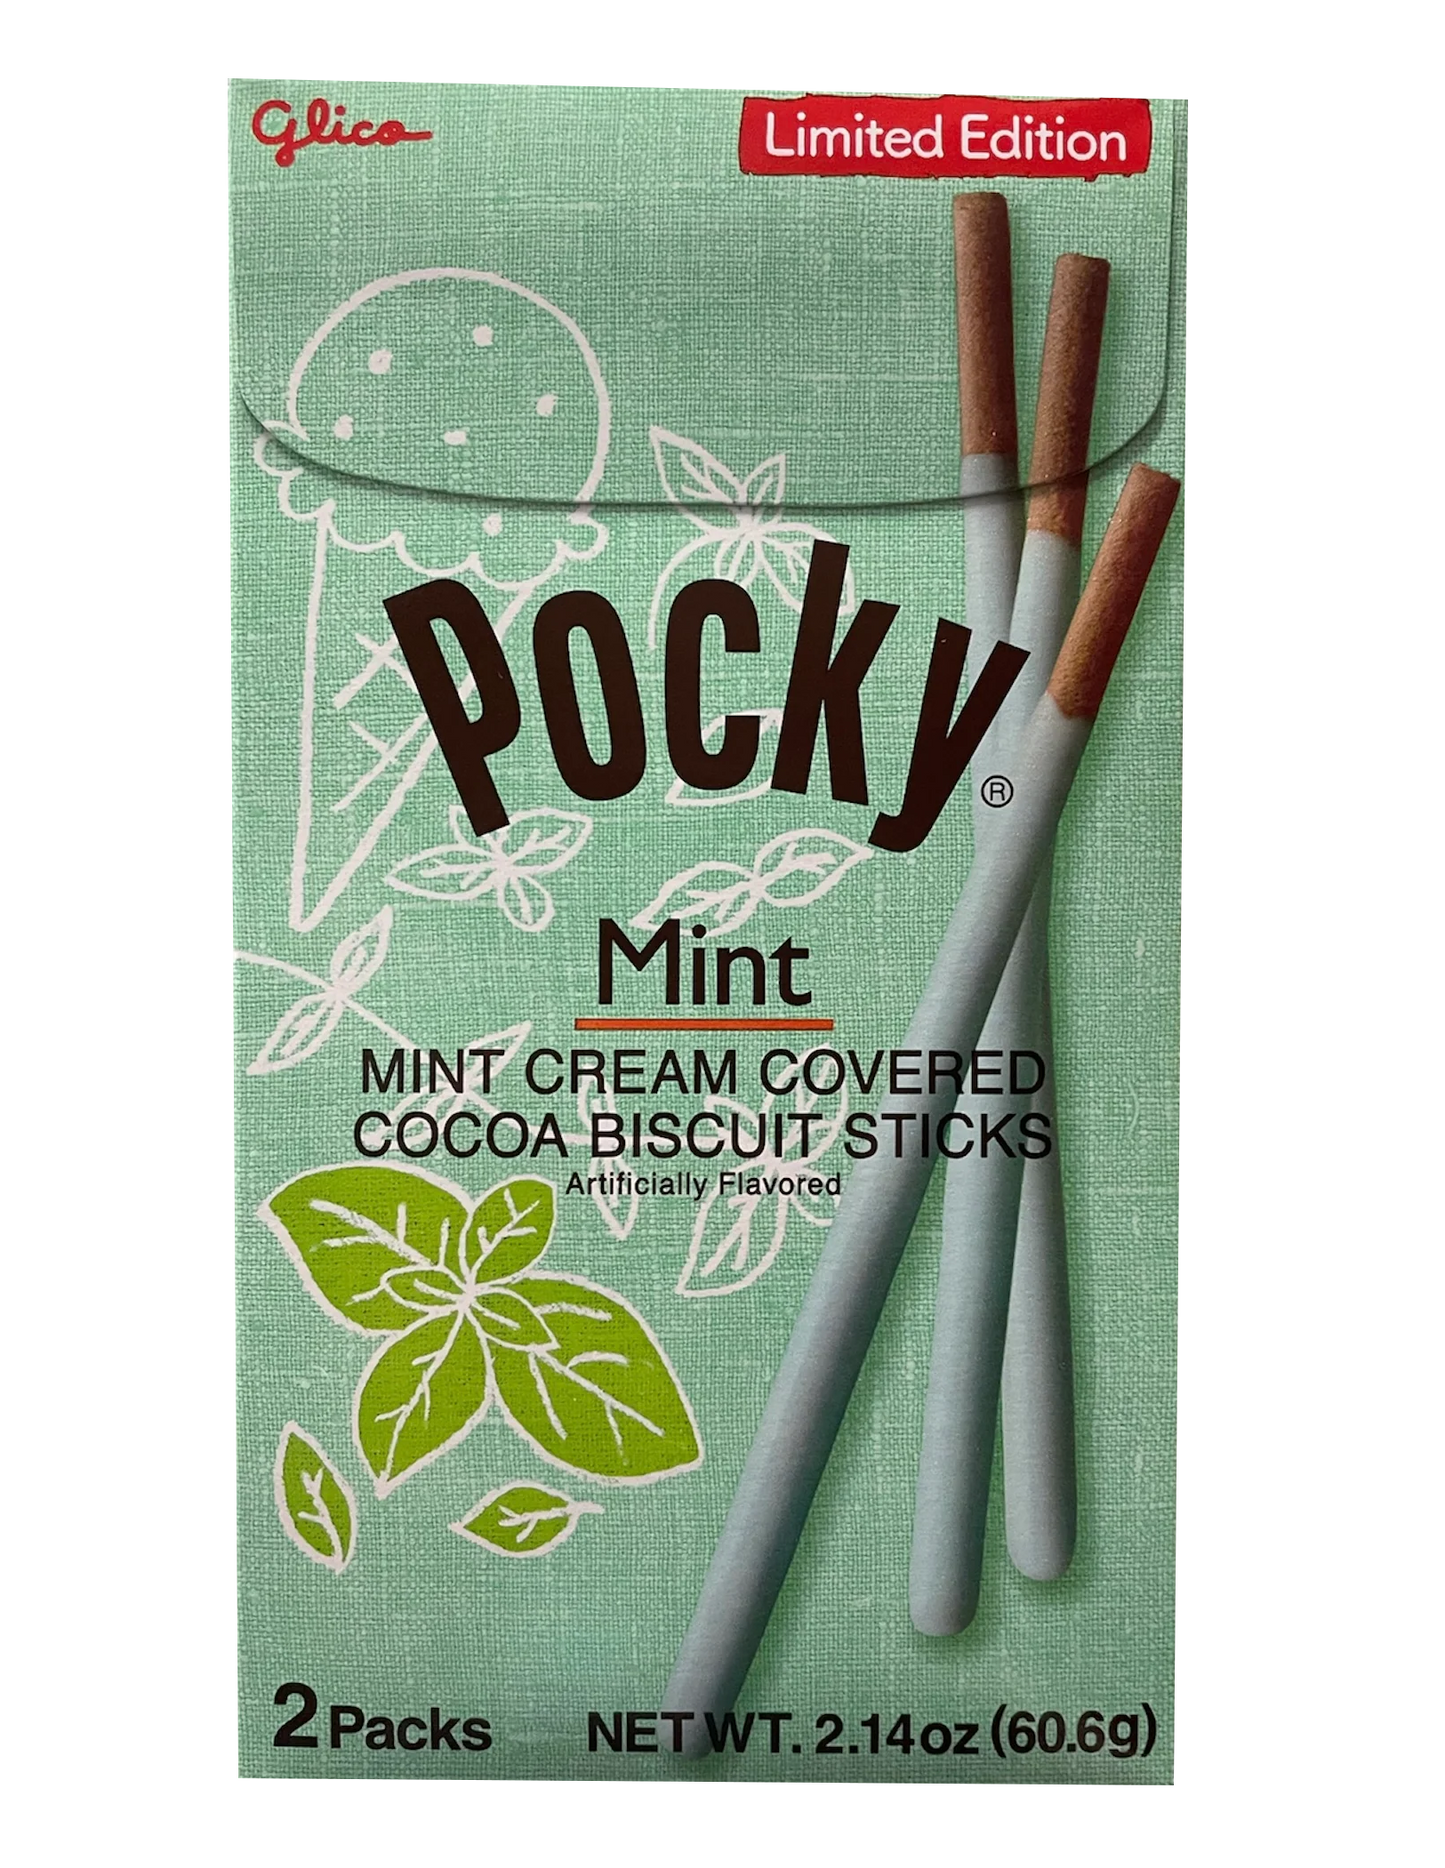 Glico - Pocky - Limited Edition Mint - Mint Cream Covered Cocoa Biscuit Sticks